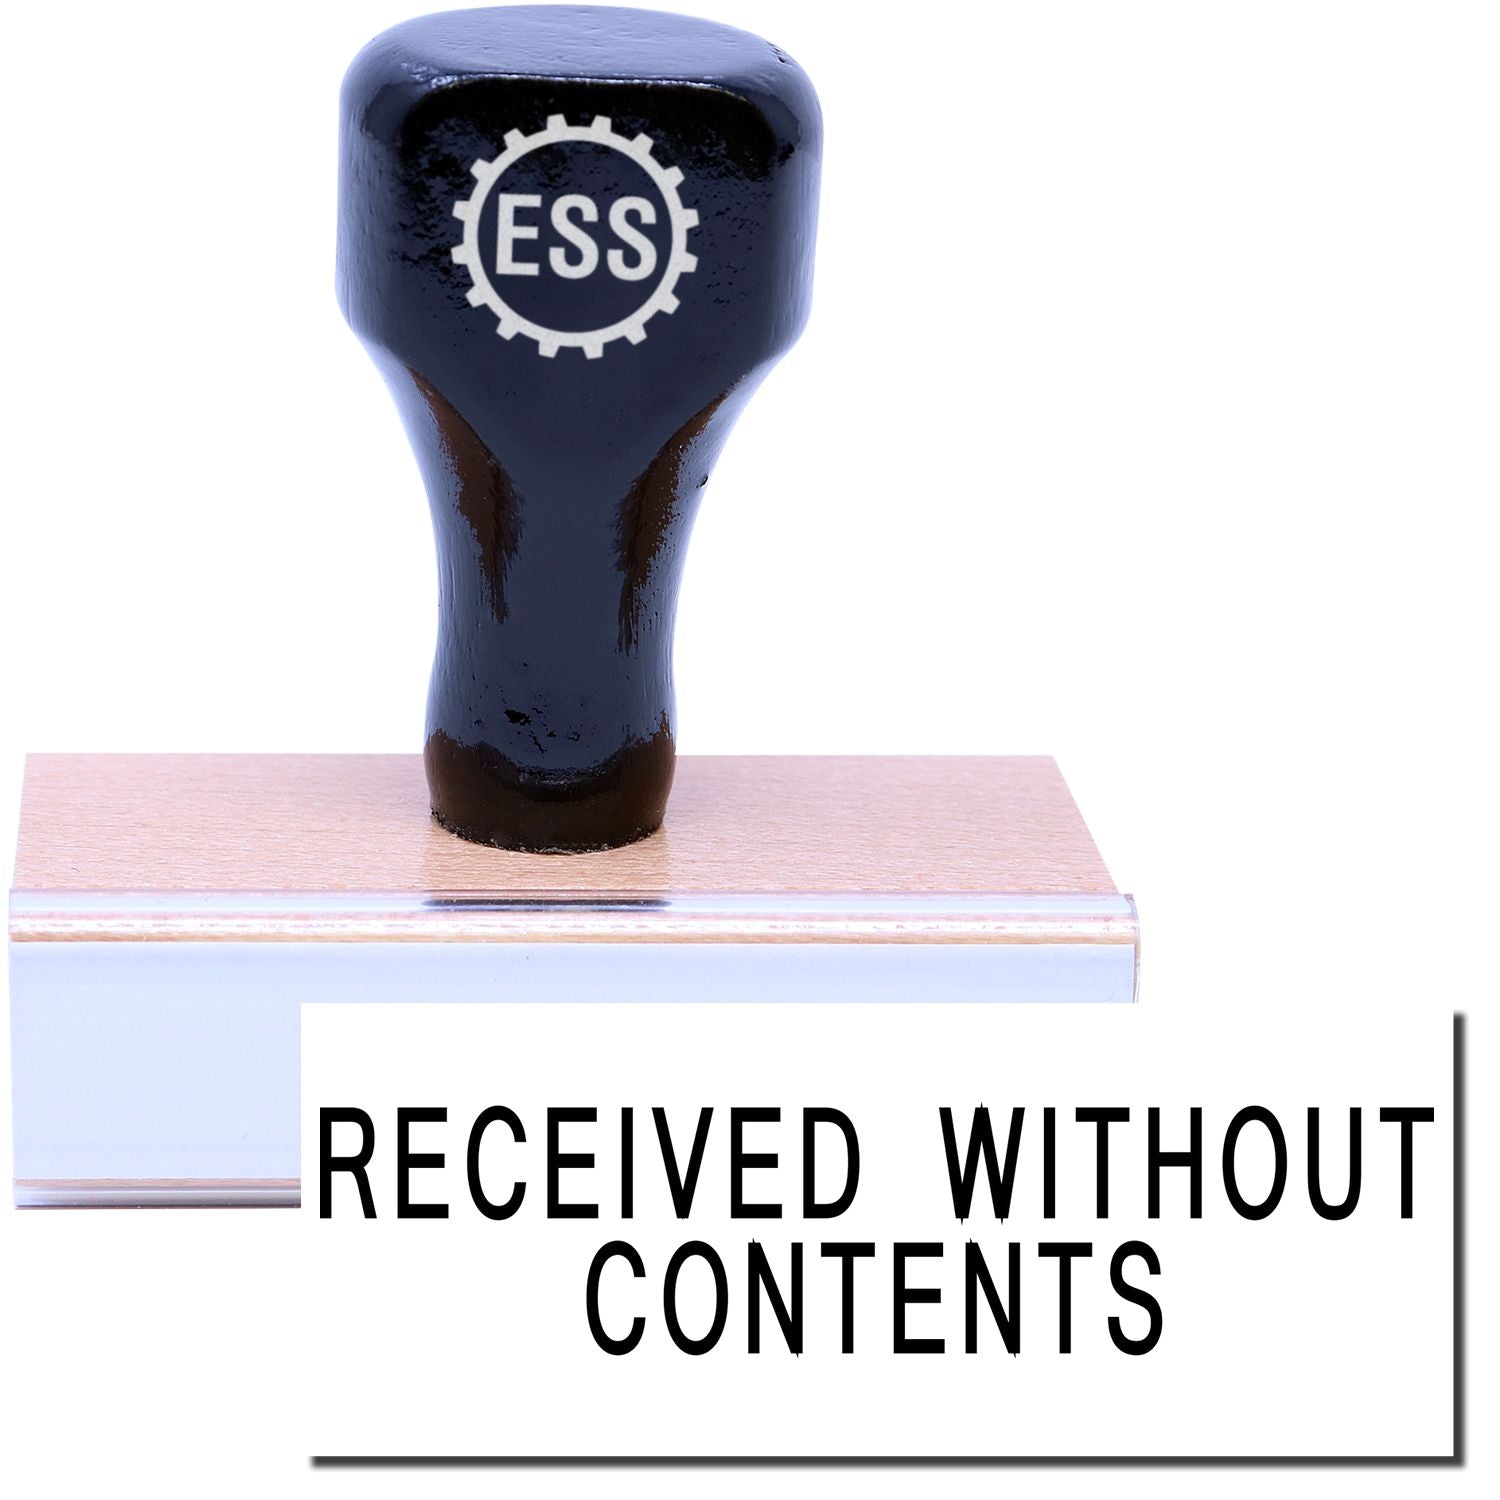 A stock office rubber stamp with a stamped image showing how the text "RECEIVED WITHOUT CONTENTS" in a large font is displayed after stamping.